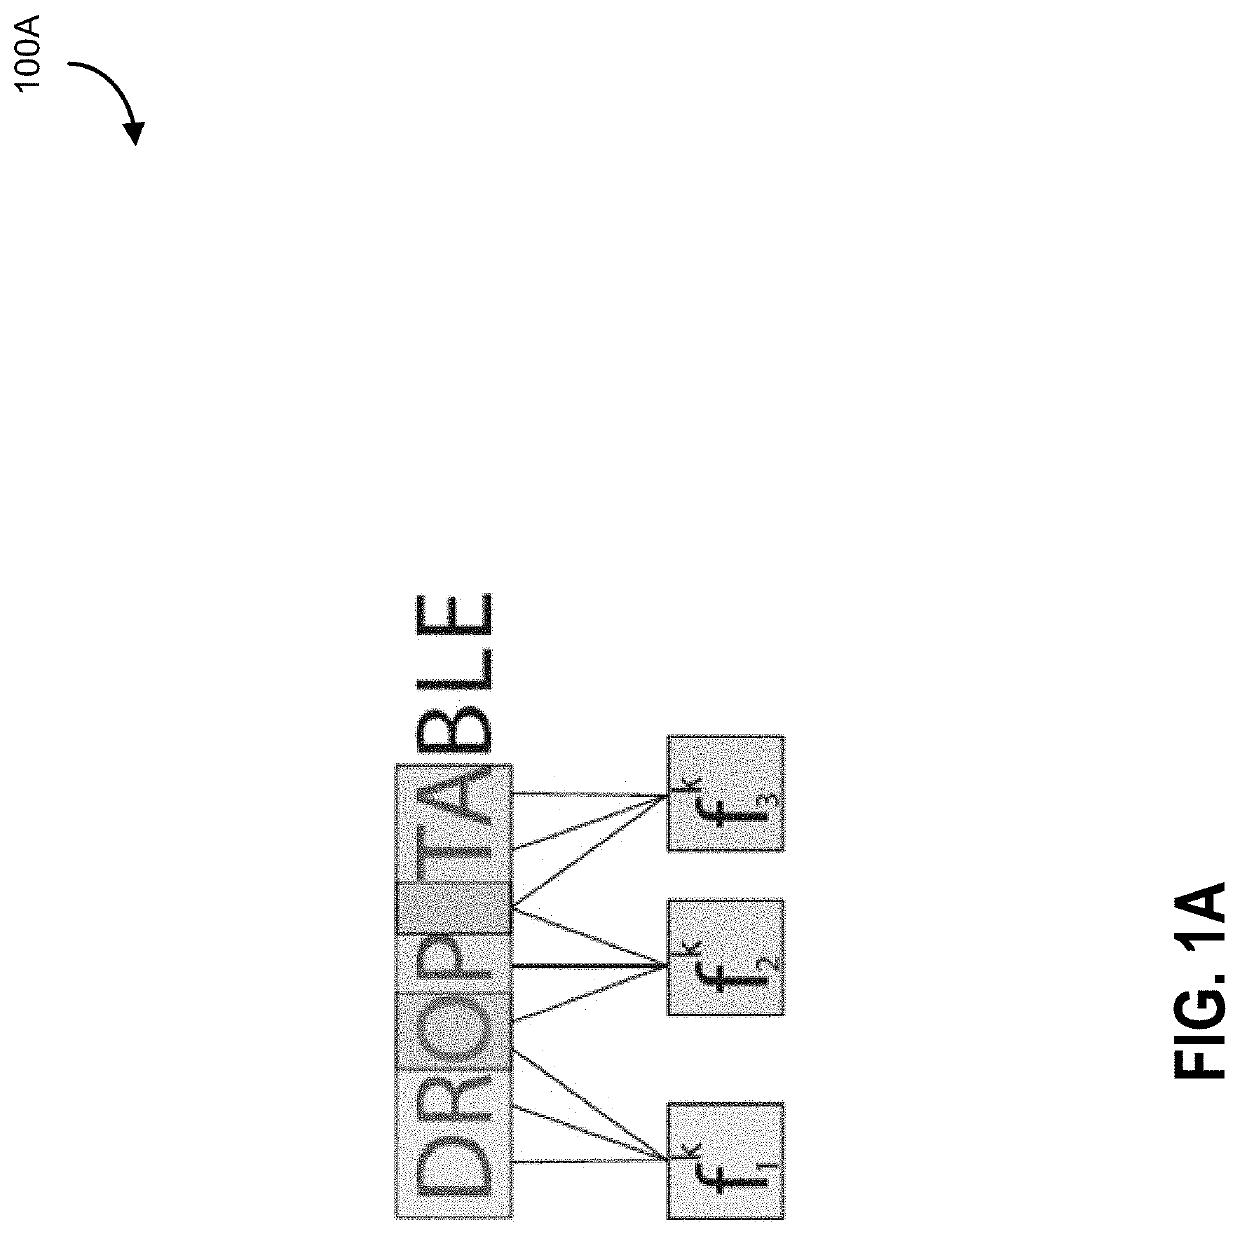 Systems and methods for malicious code detection